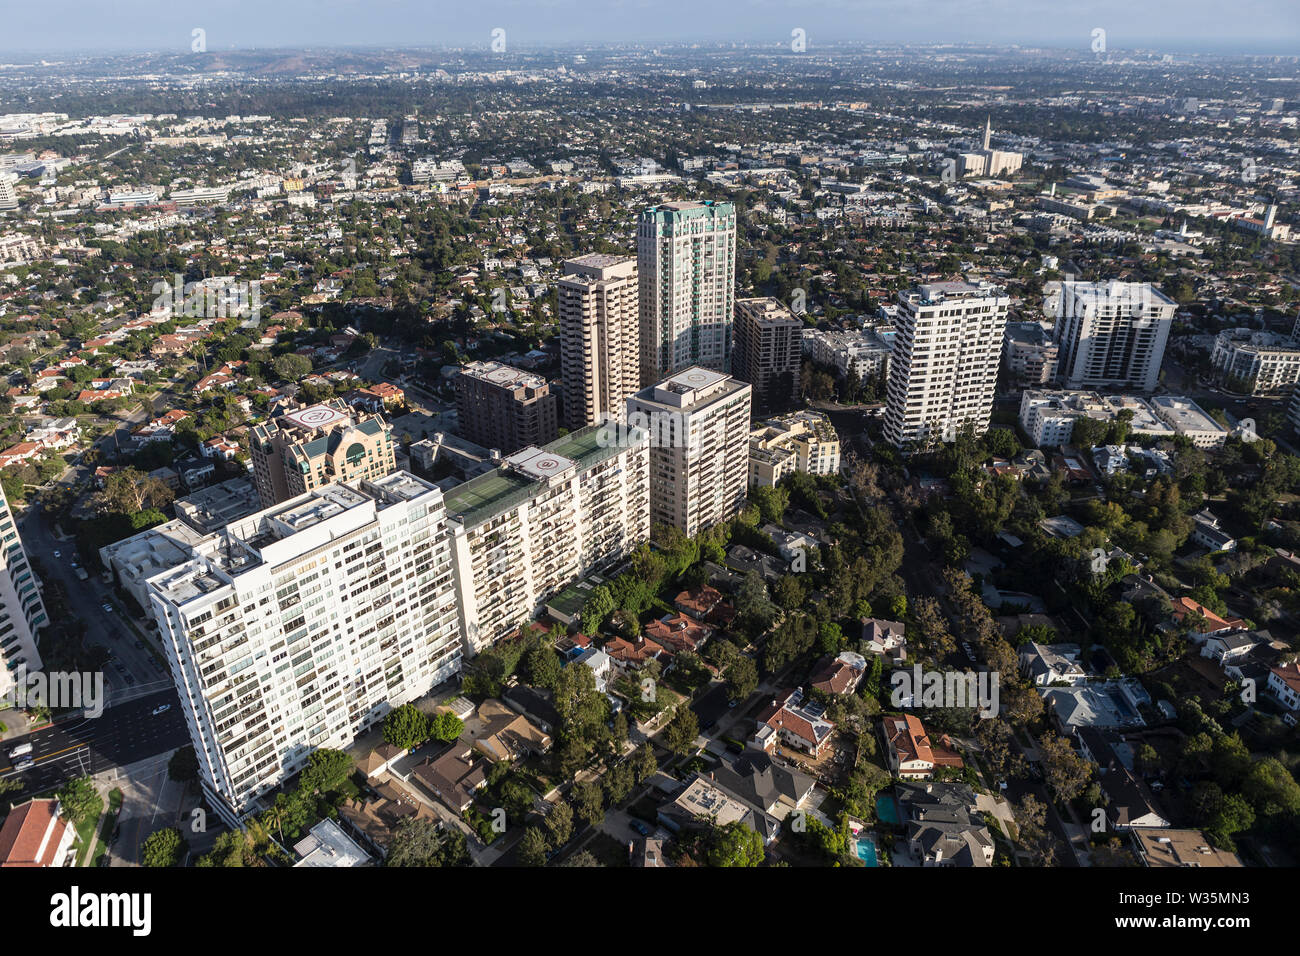 Aerial view of condos, apartments and houses along the Wilshire Blvd in West Los Angeles, California. Stock Photo